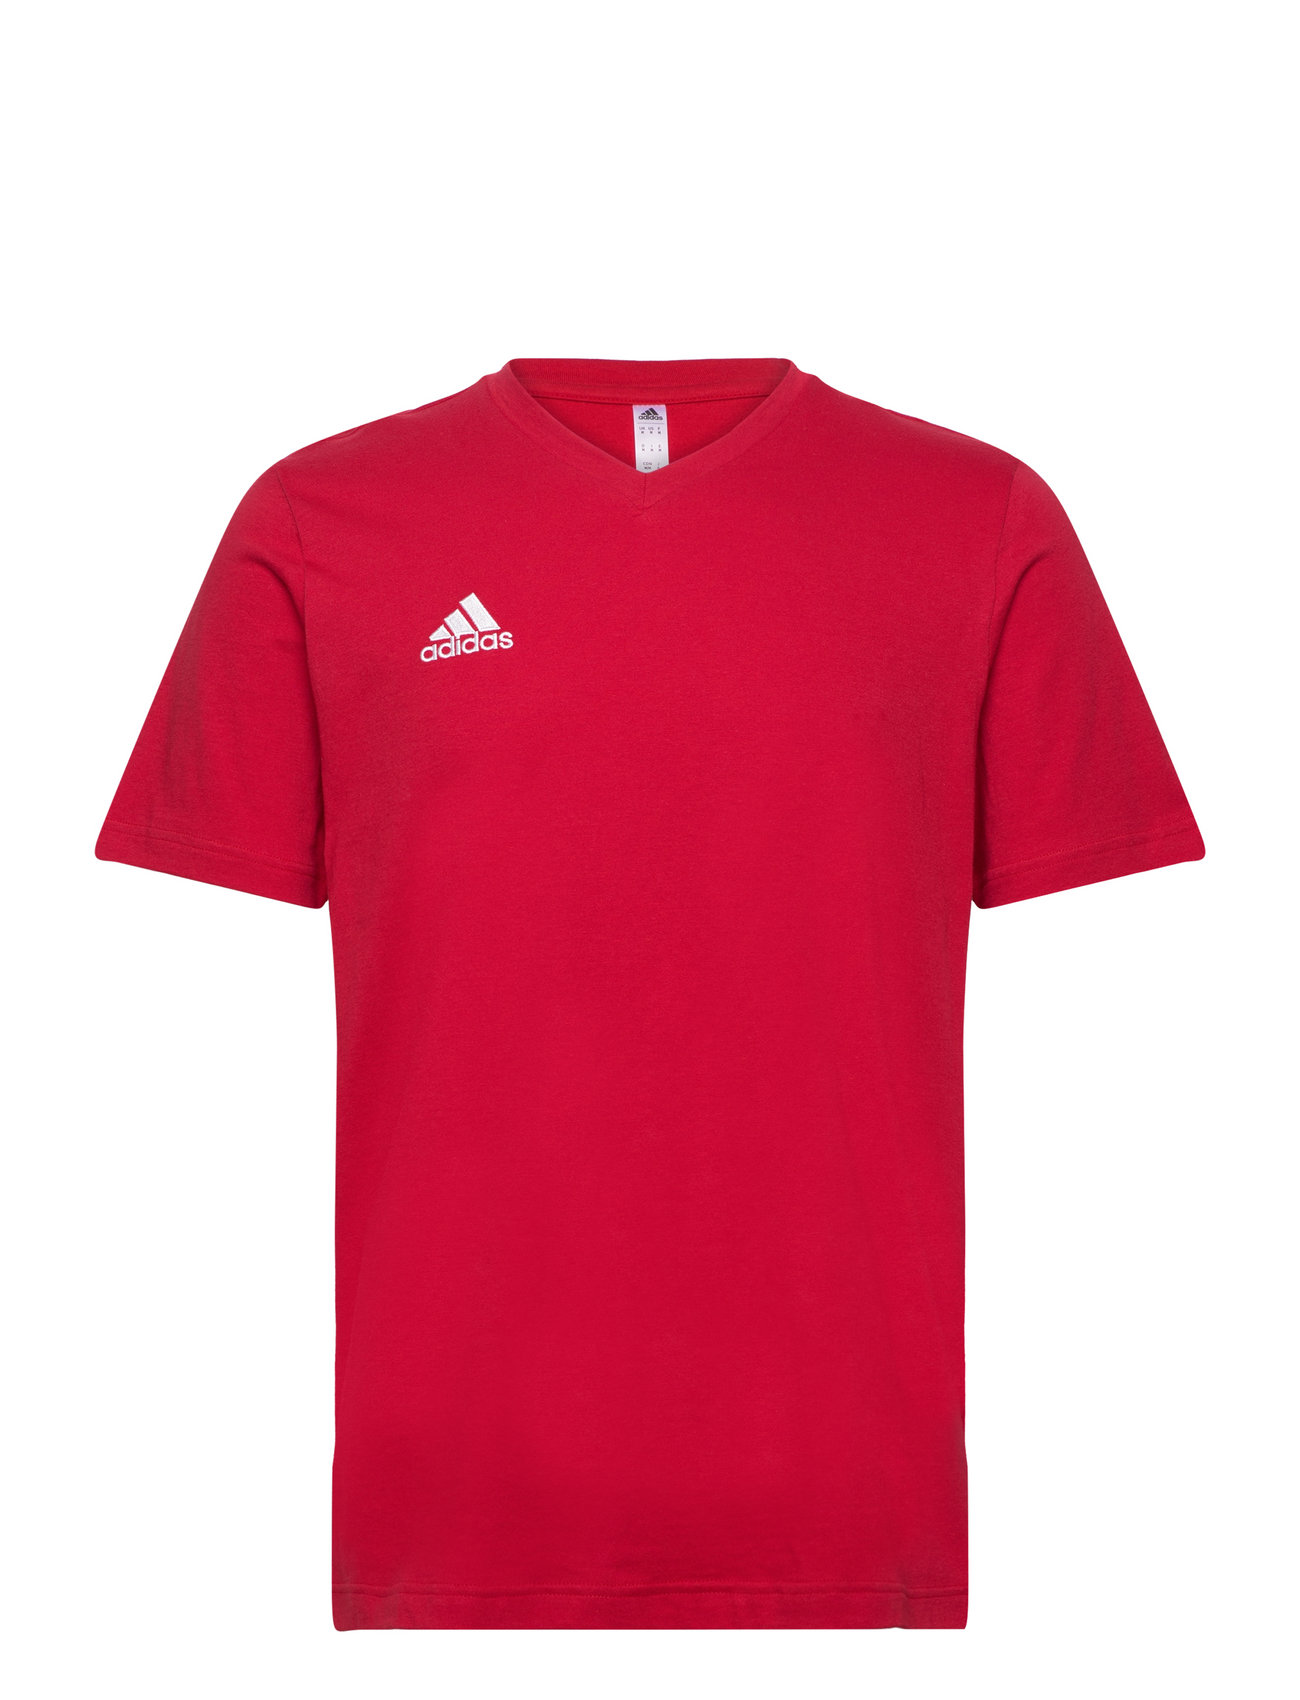 Ent22 Tee Tops T-shirts Short-sleeved Red Adidas Performance